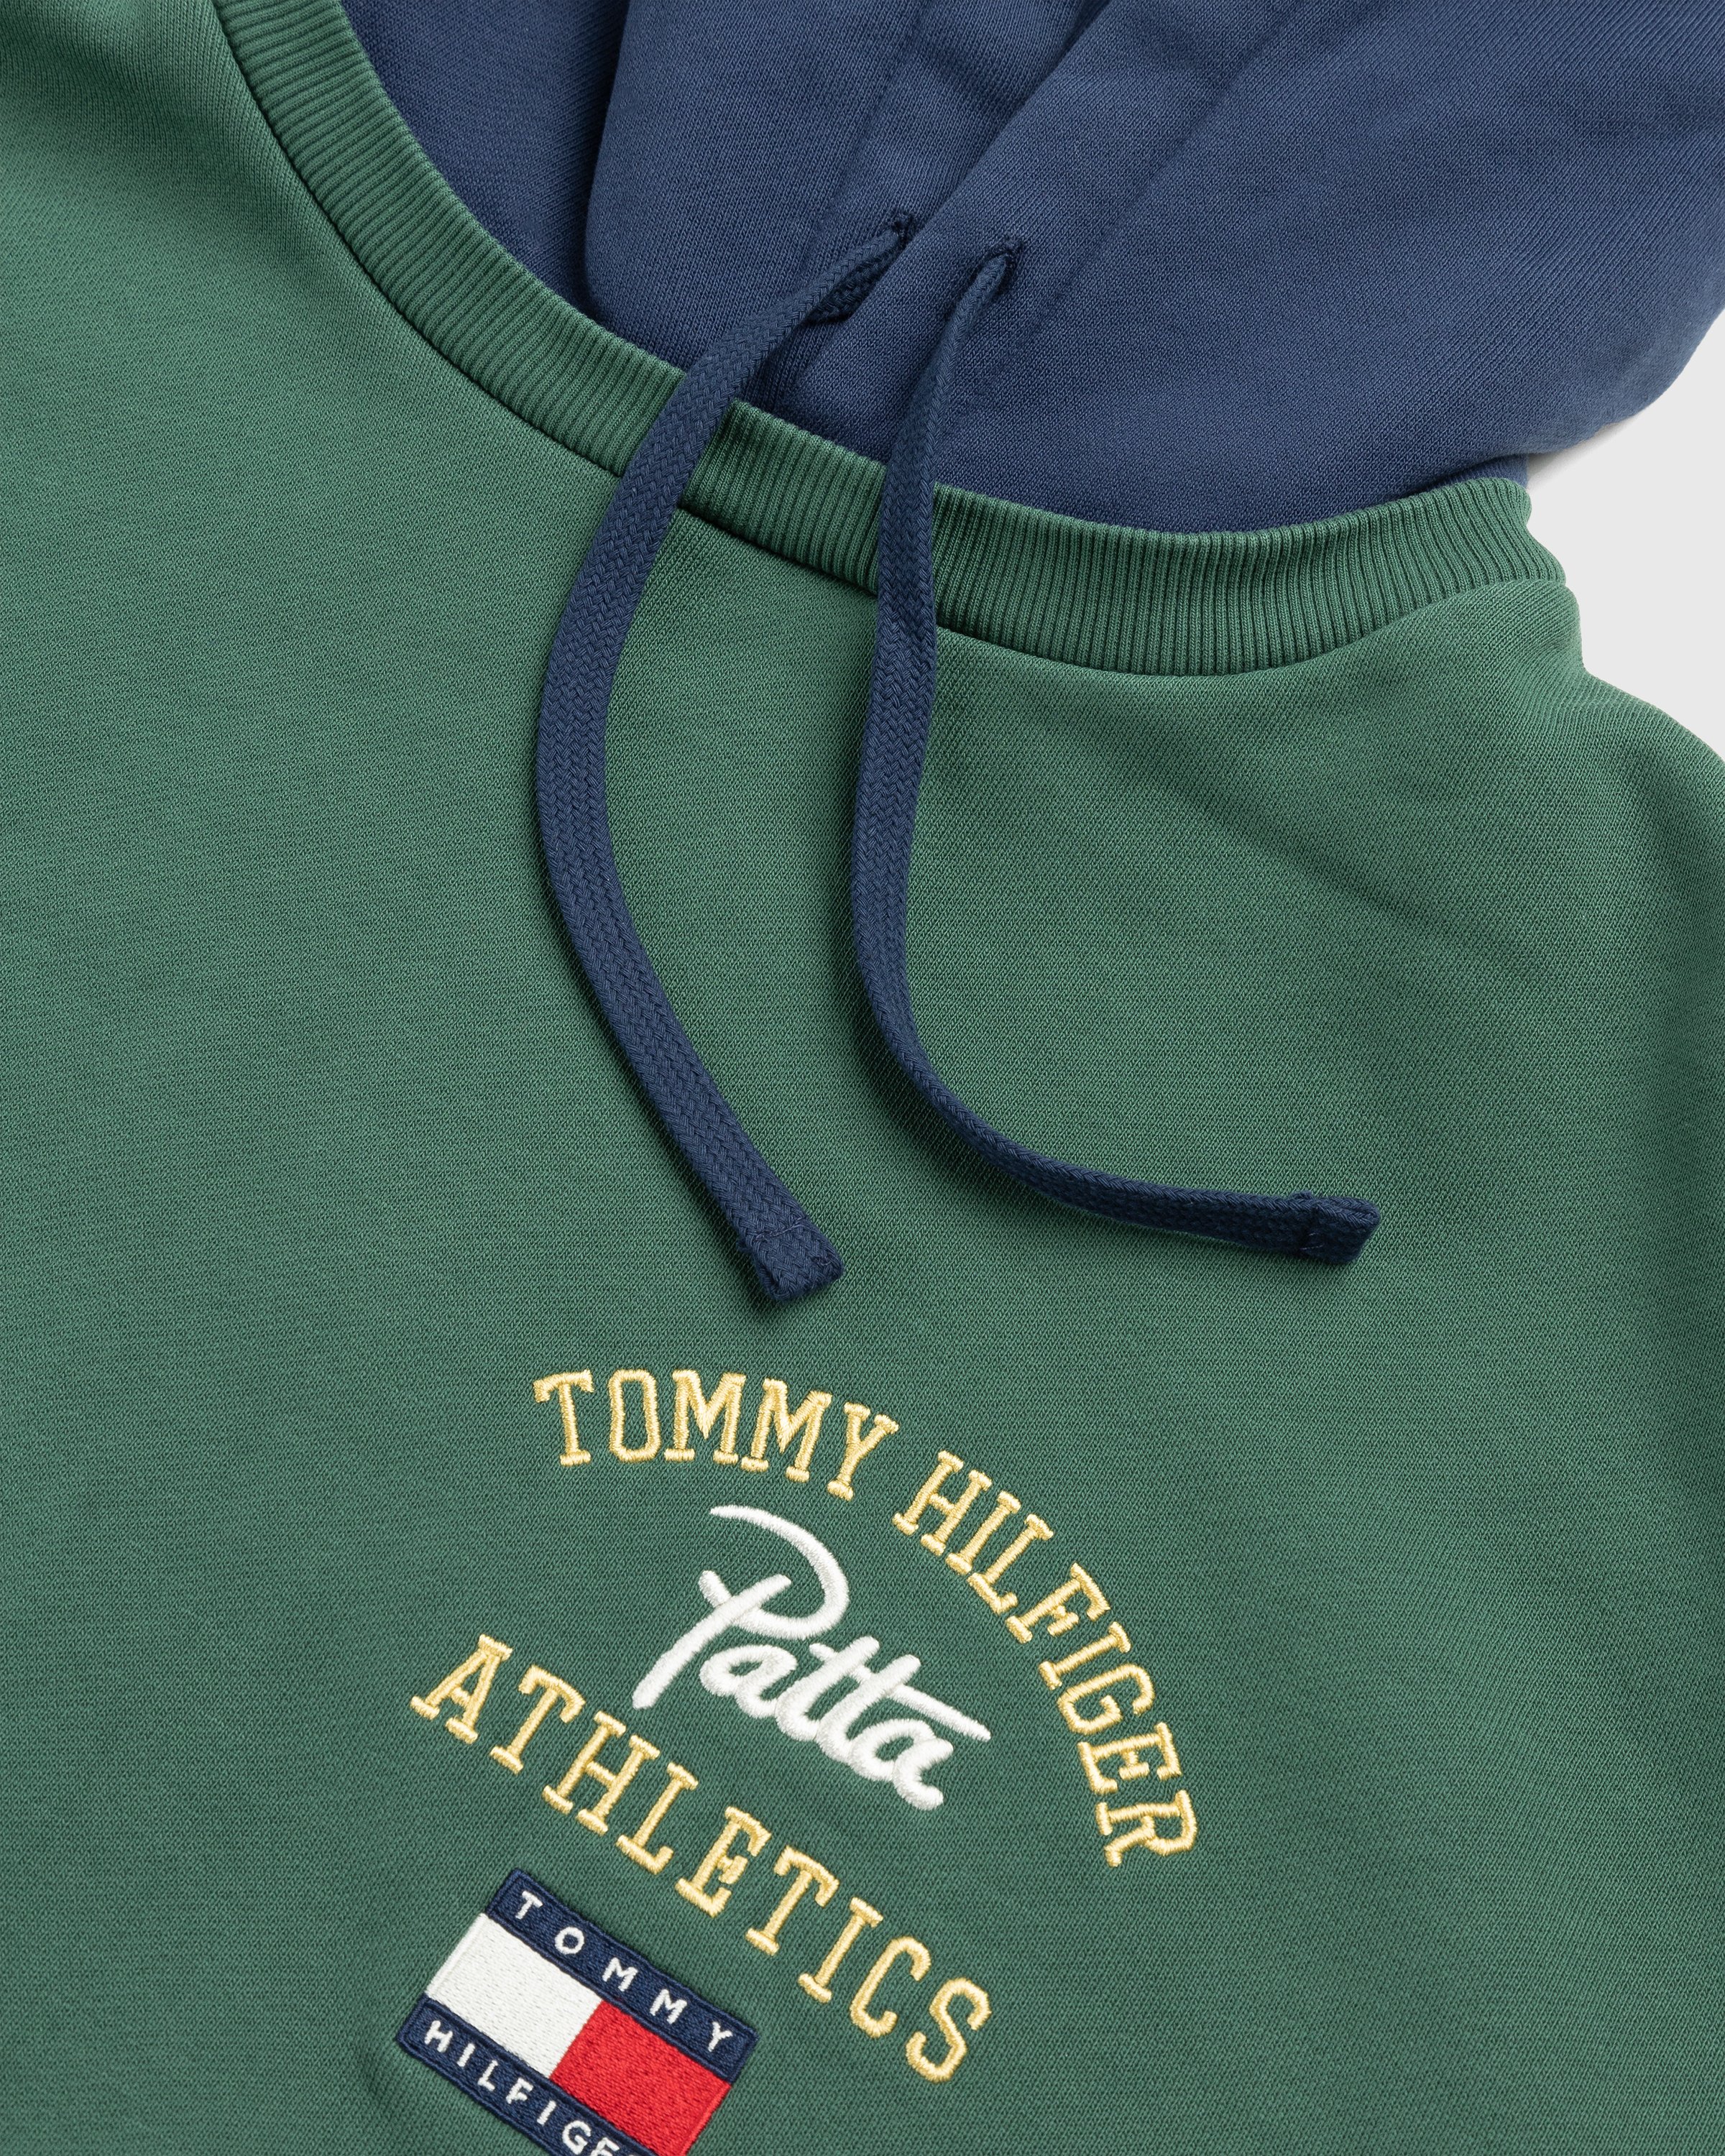 Patta x Tommy Hilfiger - Hoodie Midnight Green - Clothing - Green - Image 4